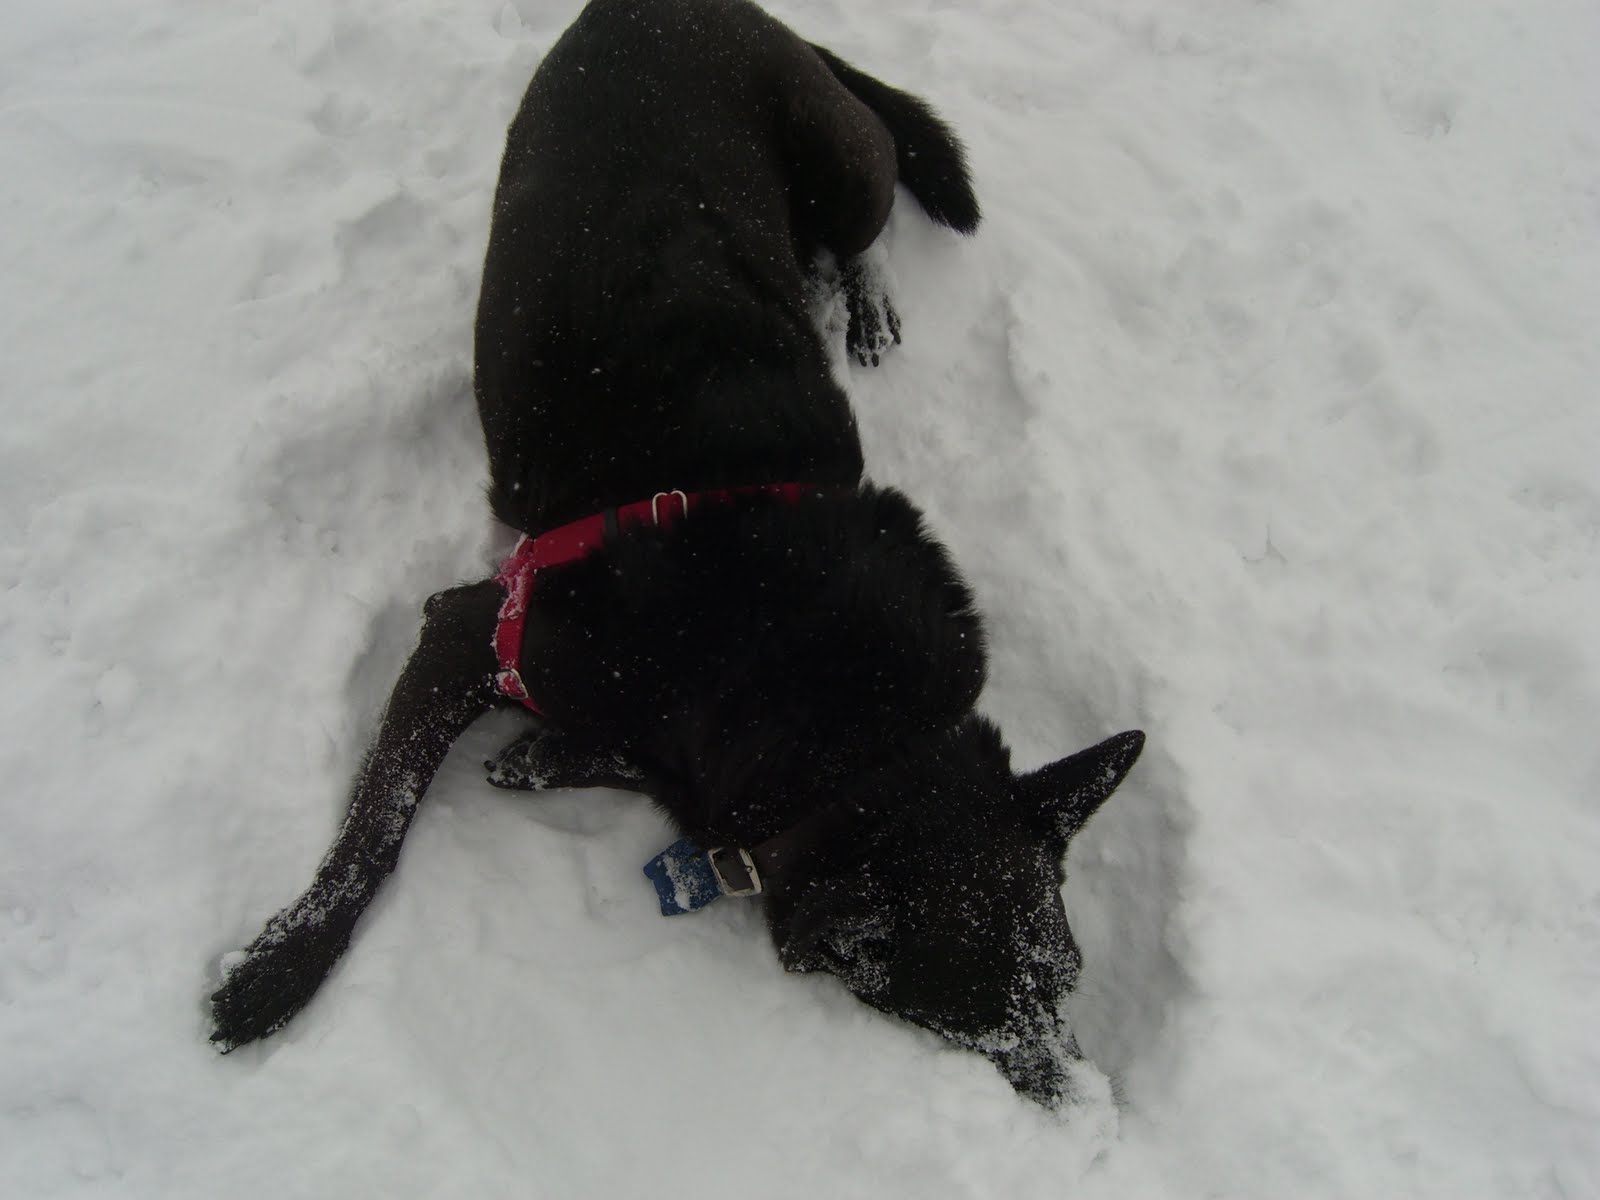 Kelly the Little Black Dog: Doggy snow angels